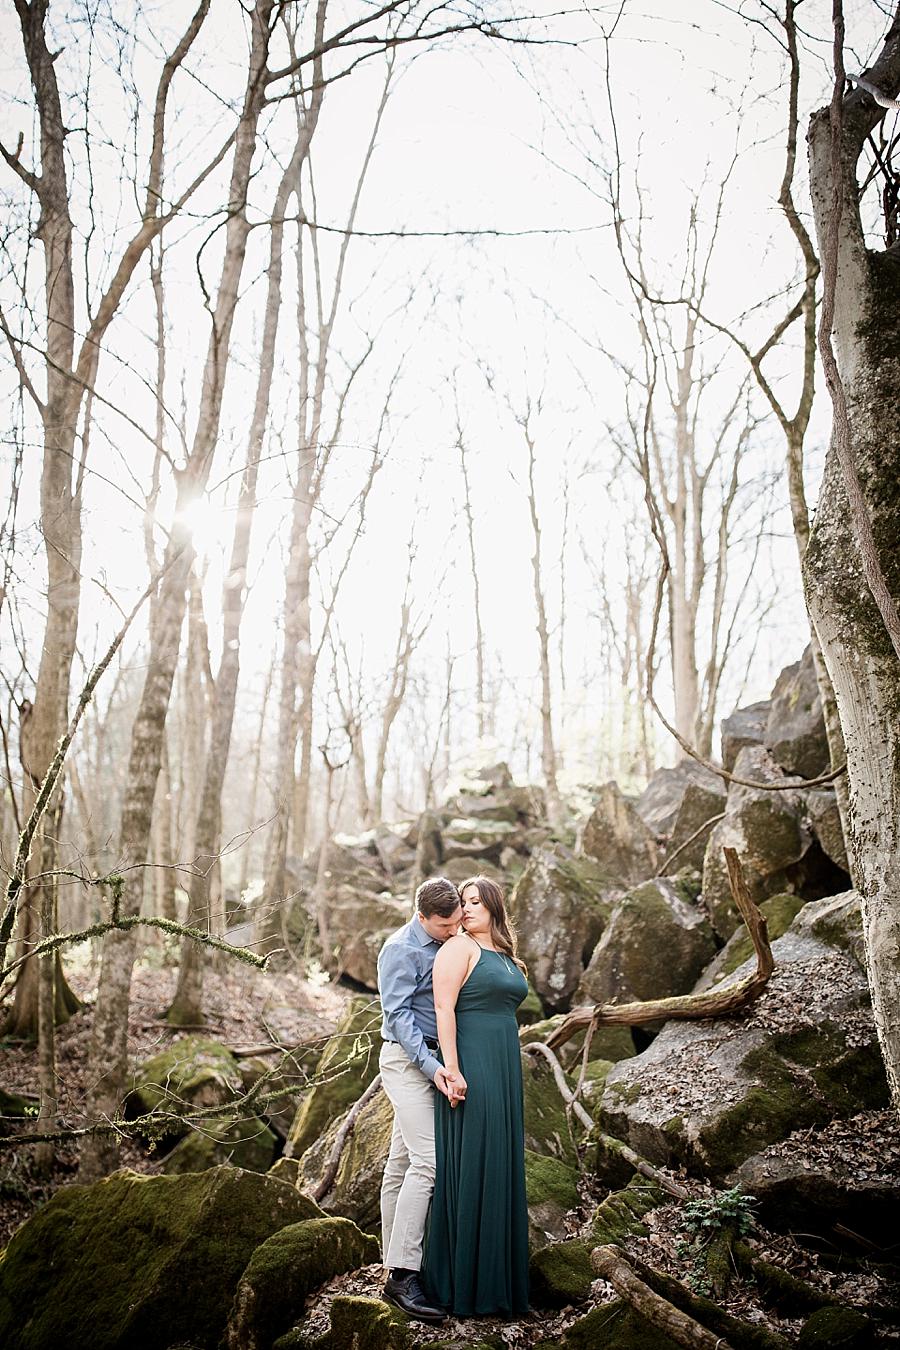 Sun peaking through at this Knoxville engagement session at The Quarry by Knoxville Wedding Photographer, Amanda May Photos.